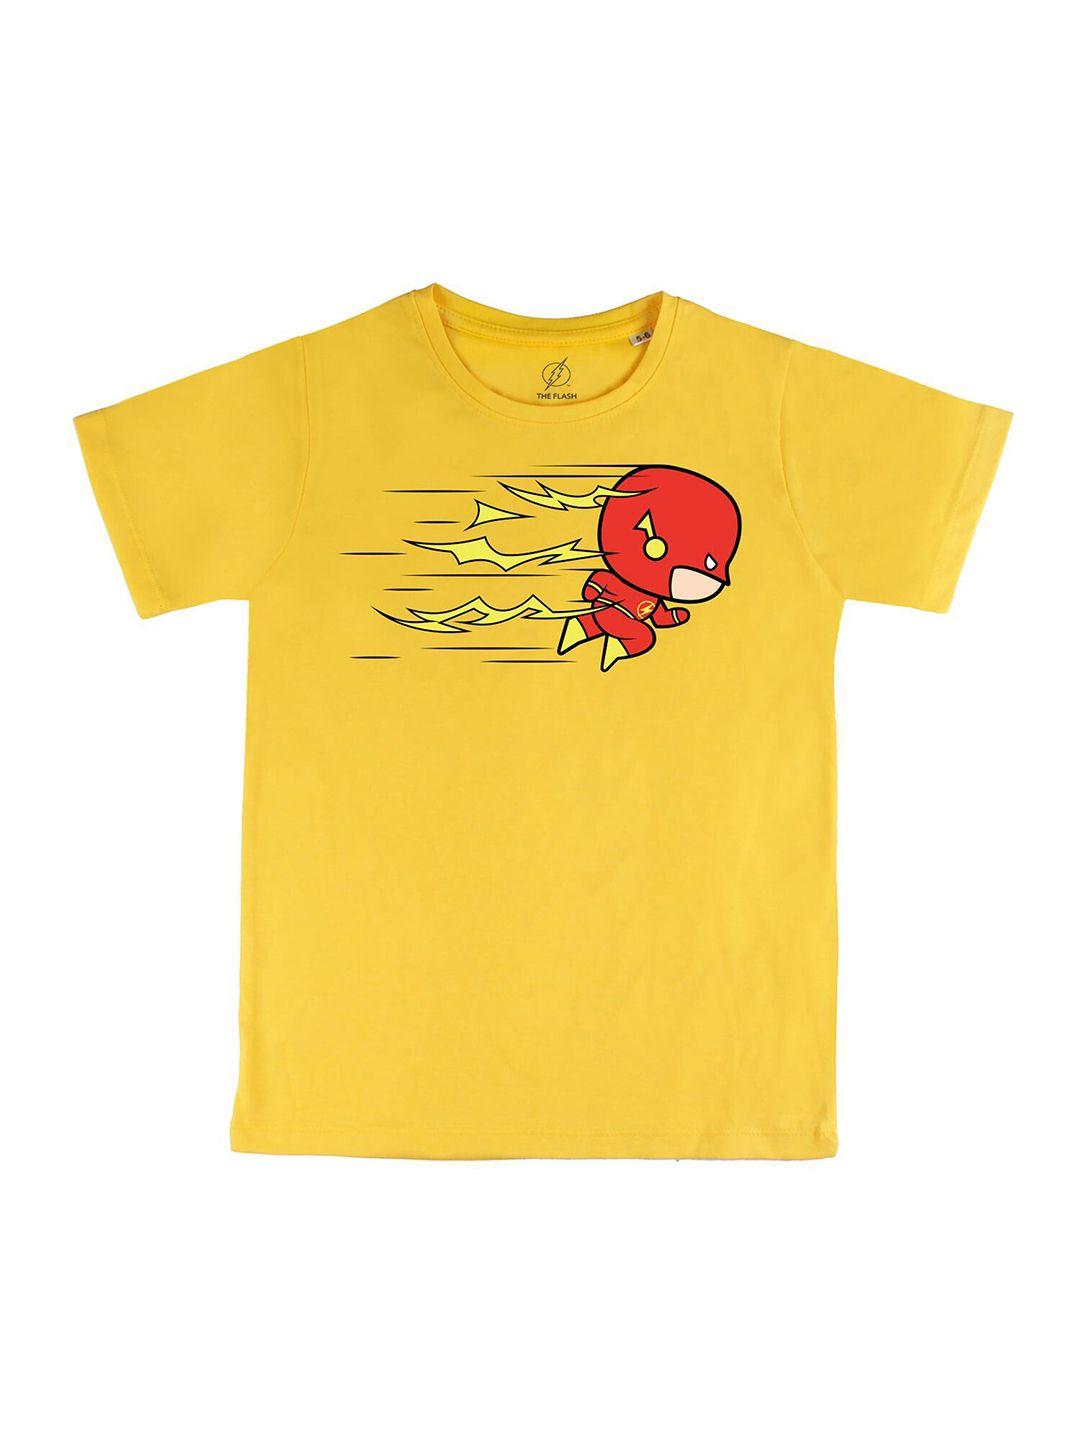 dc by wear your mind boys yellow printed t-shirt